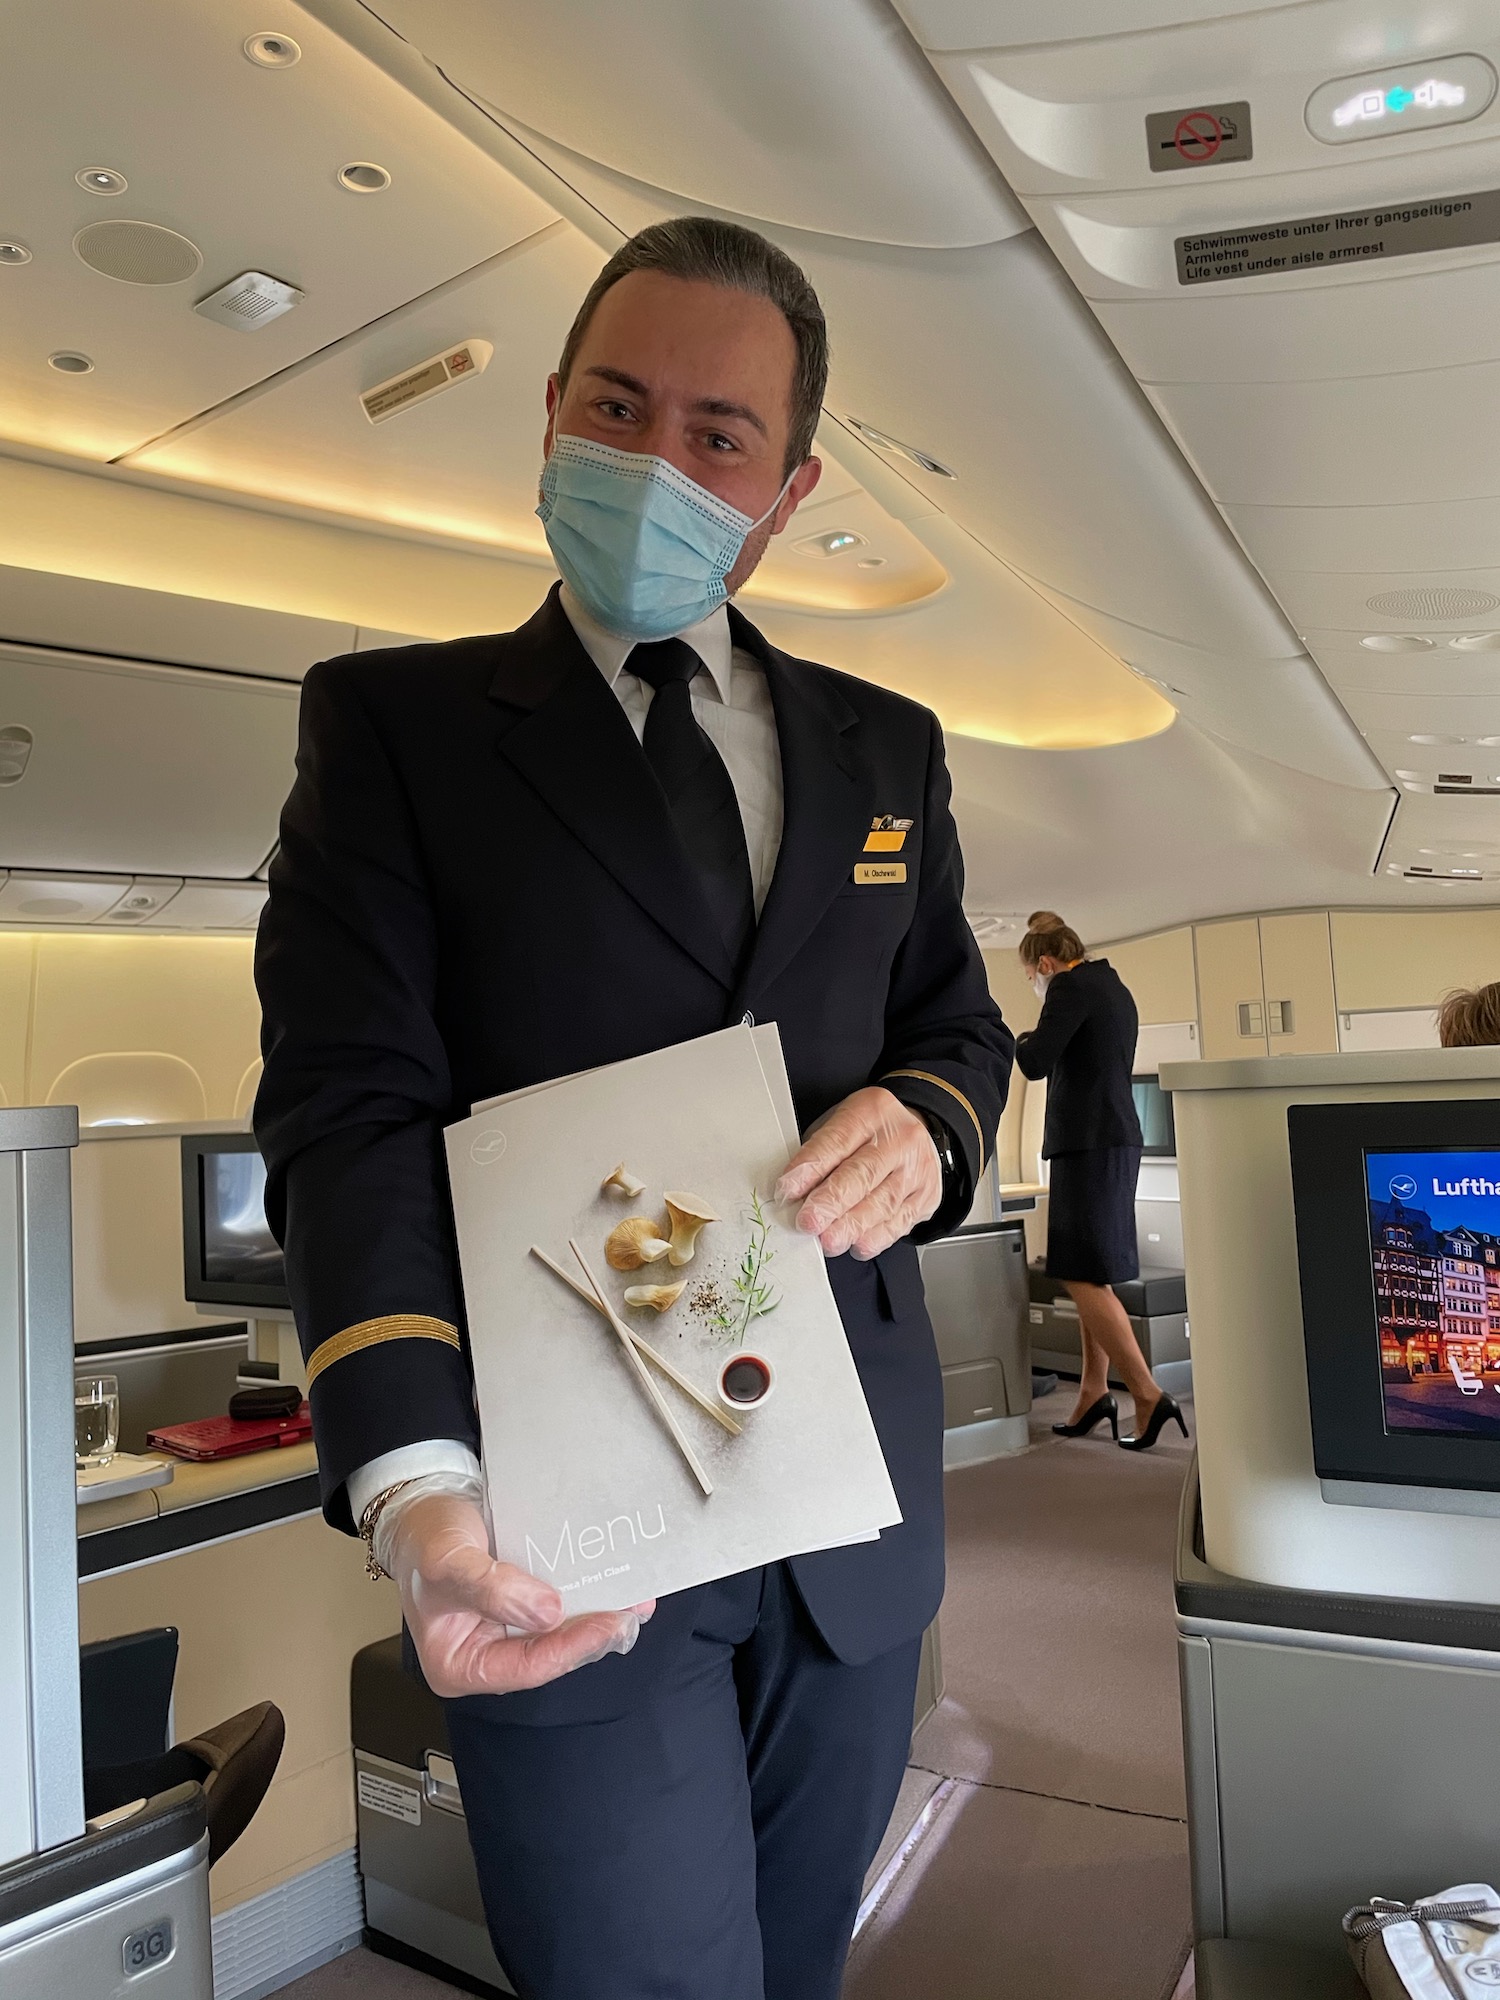 a man wearing a mask and holding a menu in an airplane